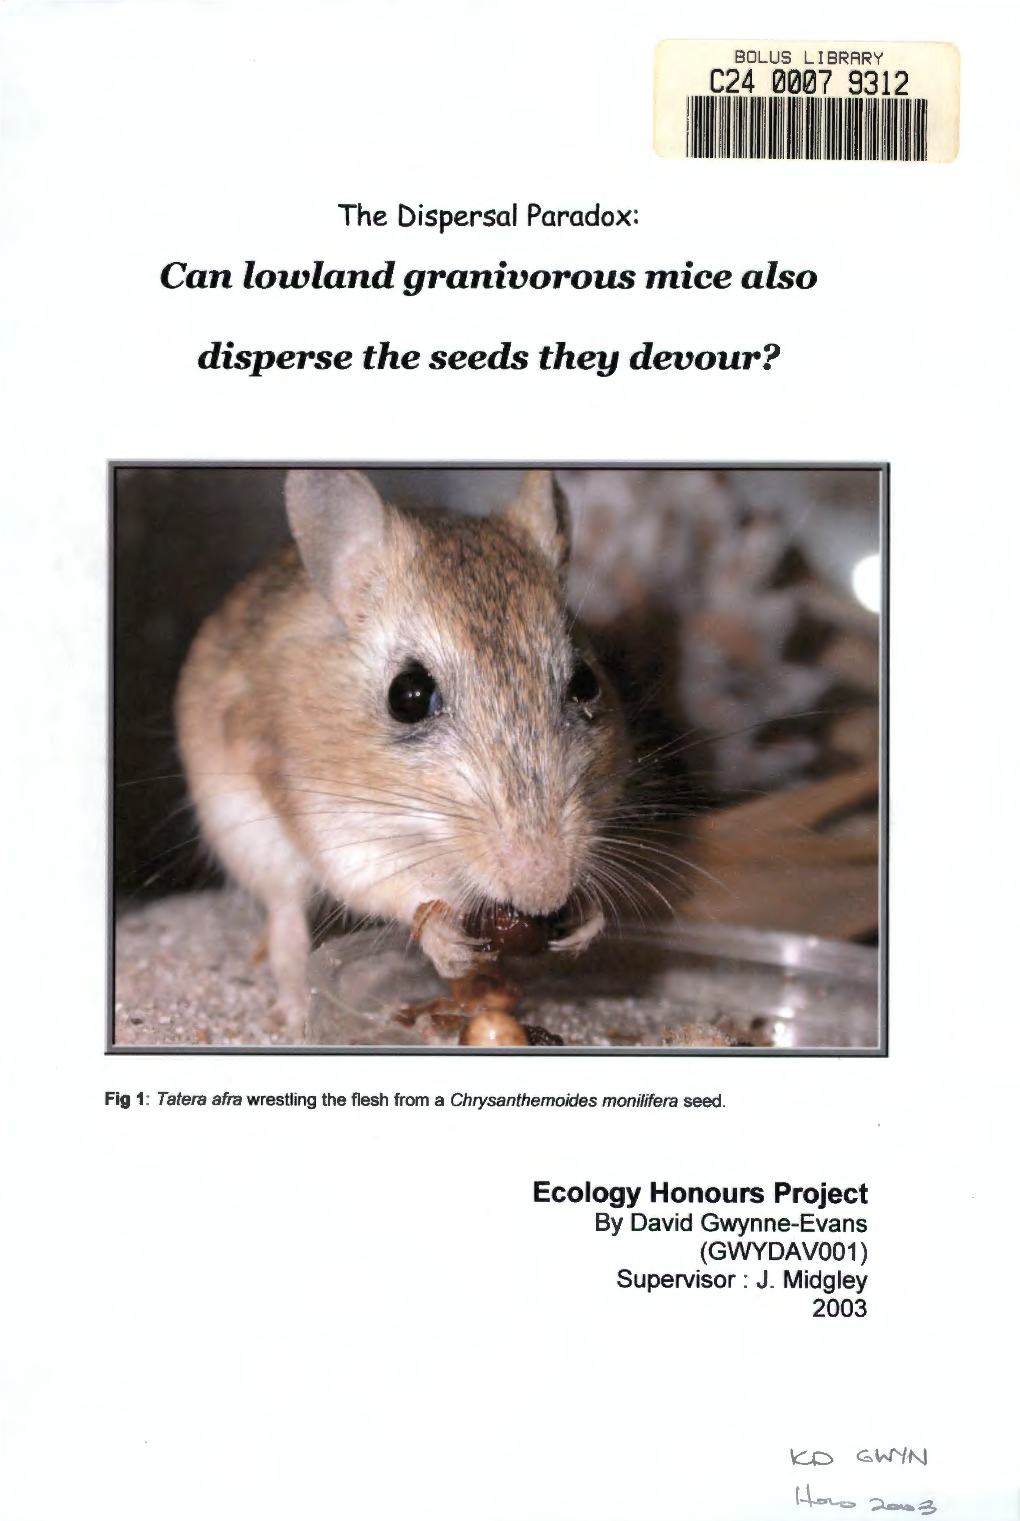 The Dispersal Paradox: Can Lowland Granivorous Mice Also